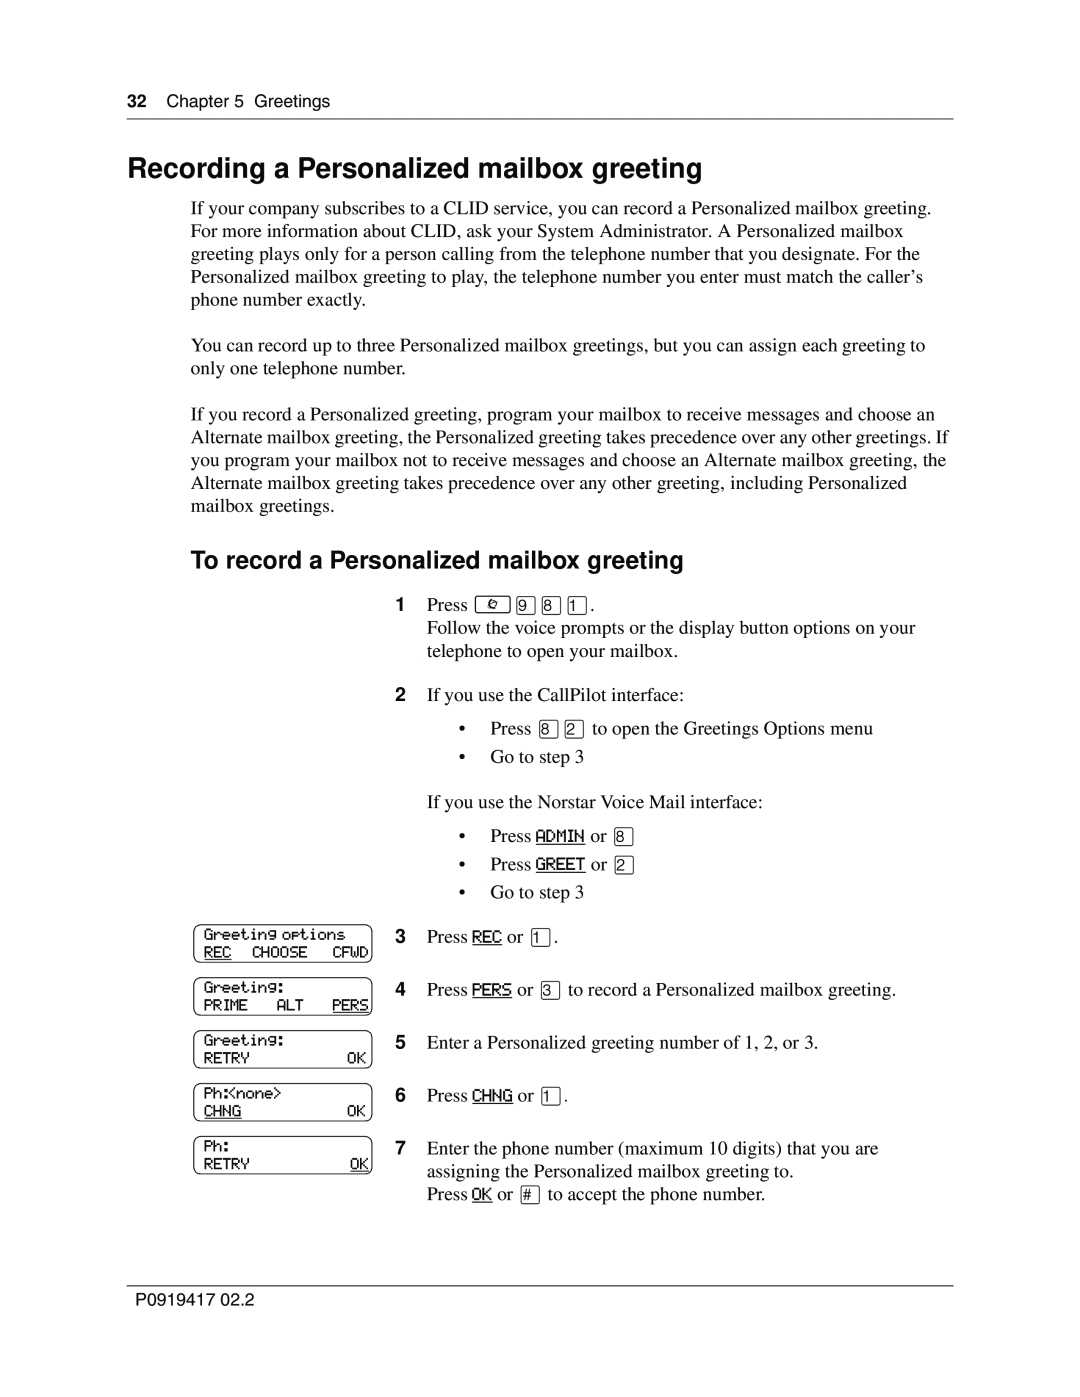 Nortel Networks CallPilot manual Recording a Personalized mailbox greeting, To record a Personalized mailbox greeting 